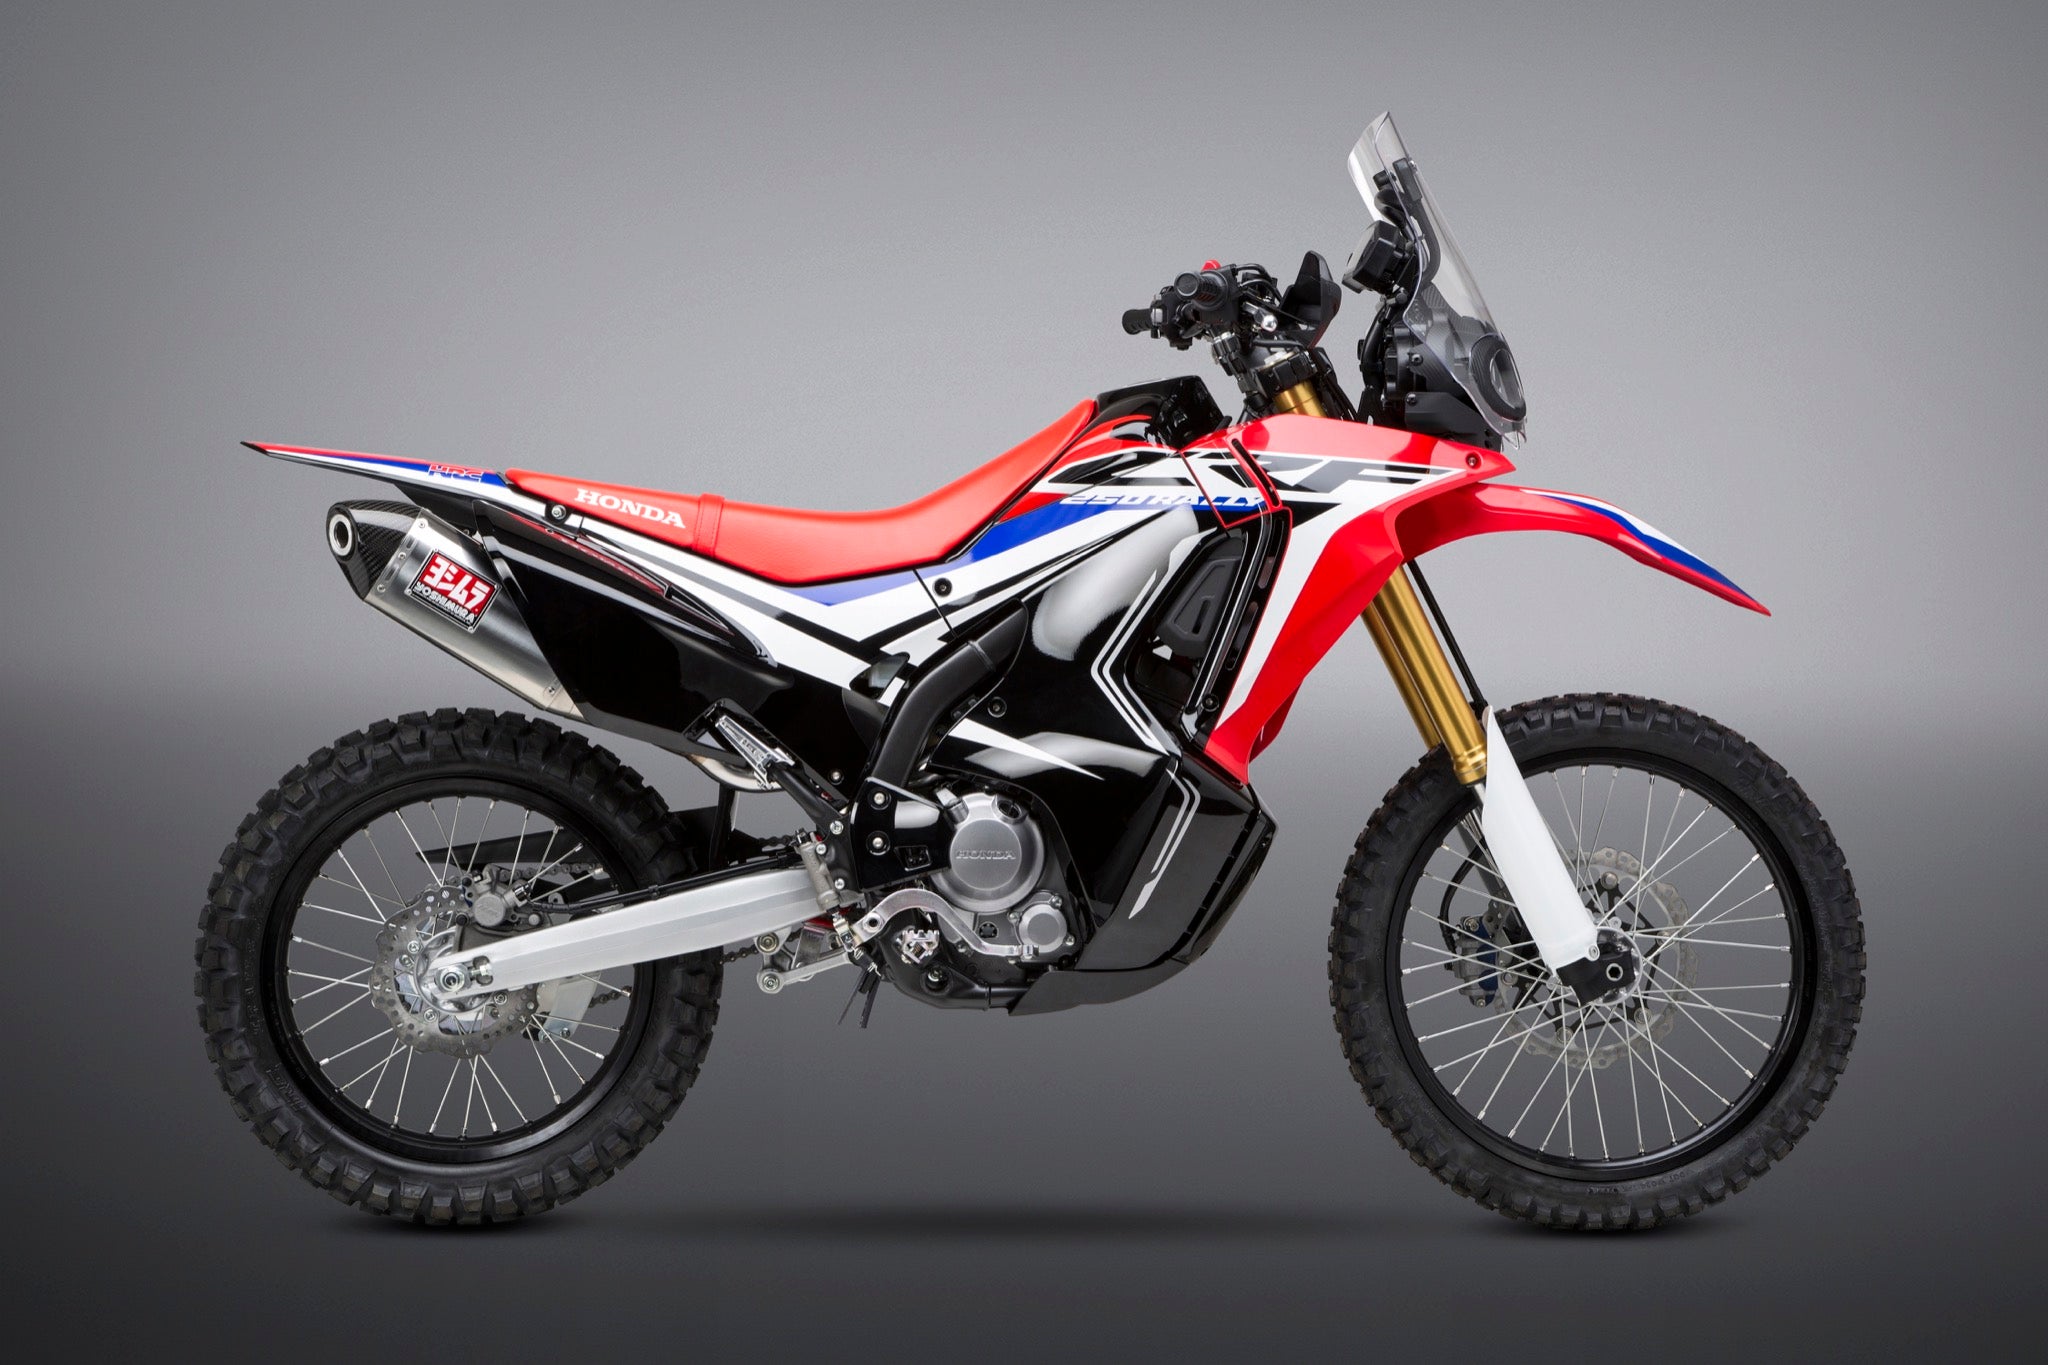 Yoshimura Crf250l Rally 17 Rs 4 Stainless Exhaust Stainless Muffler Yoshimura R D Of America Inc